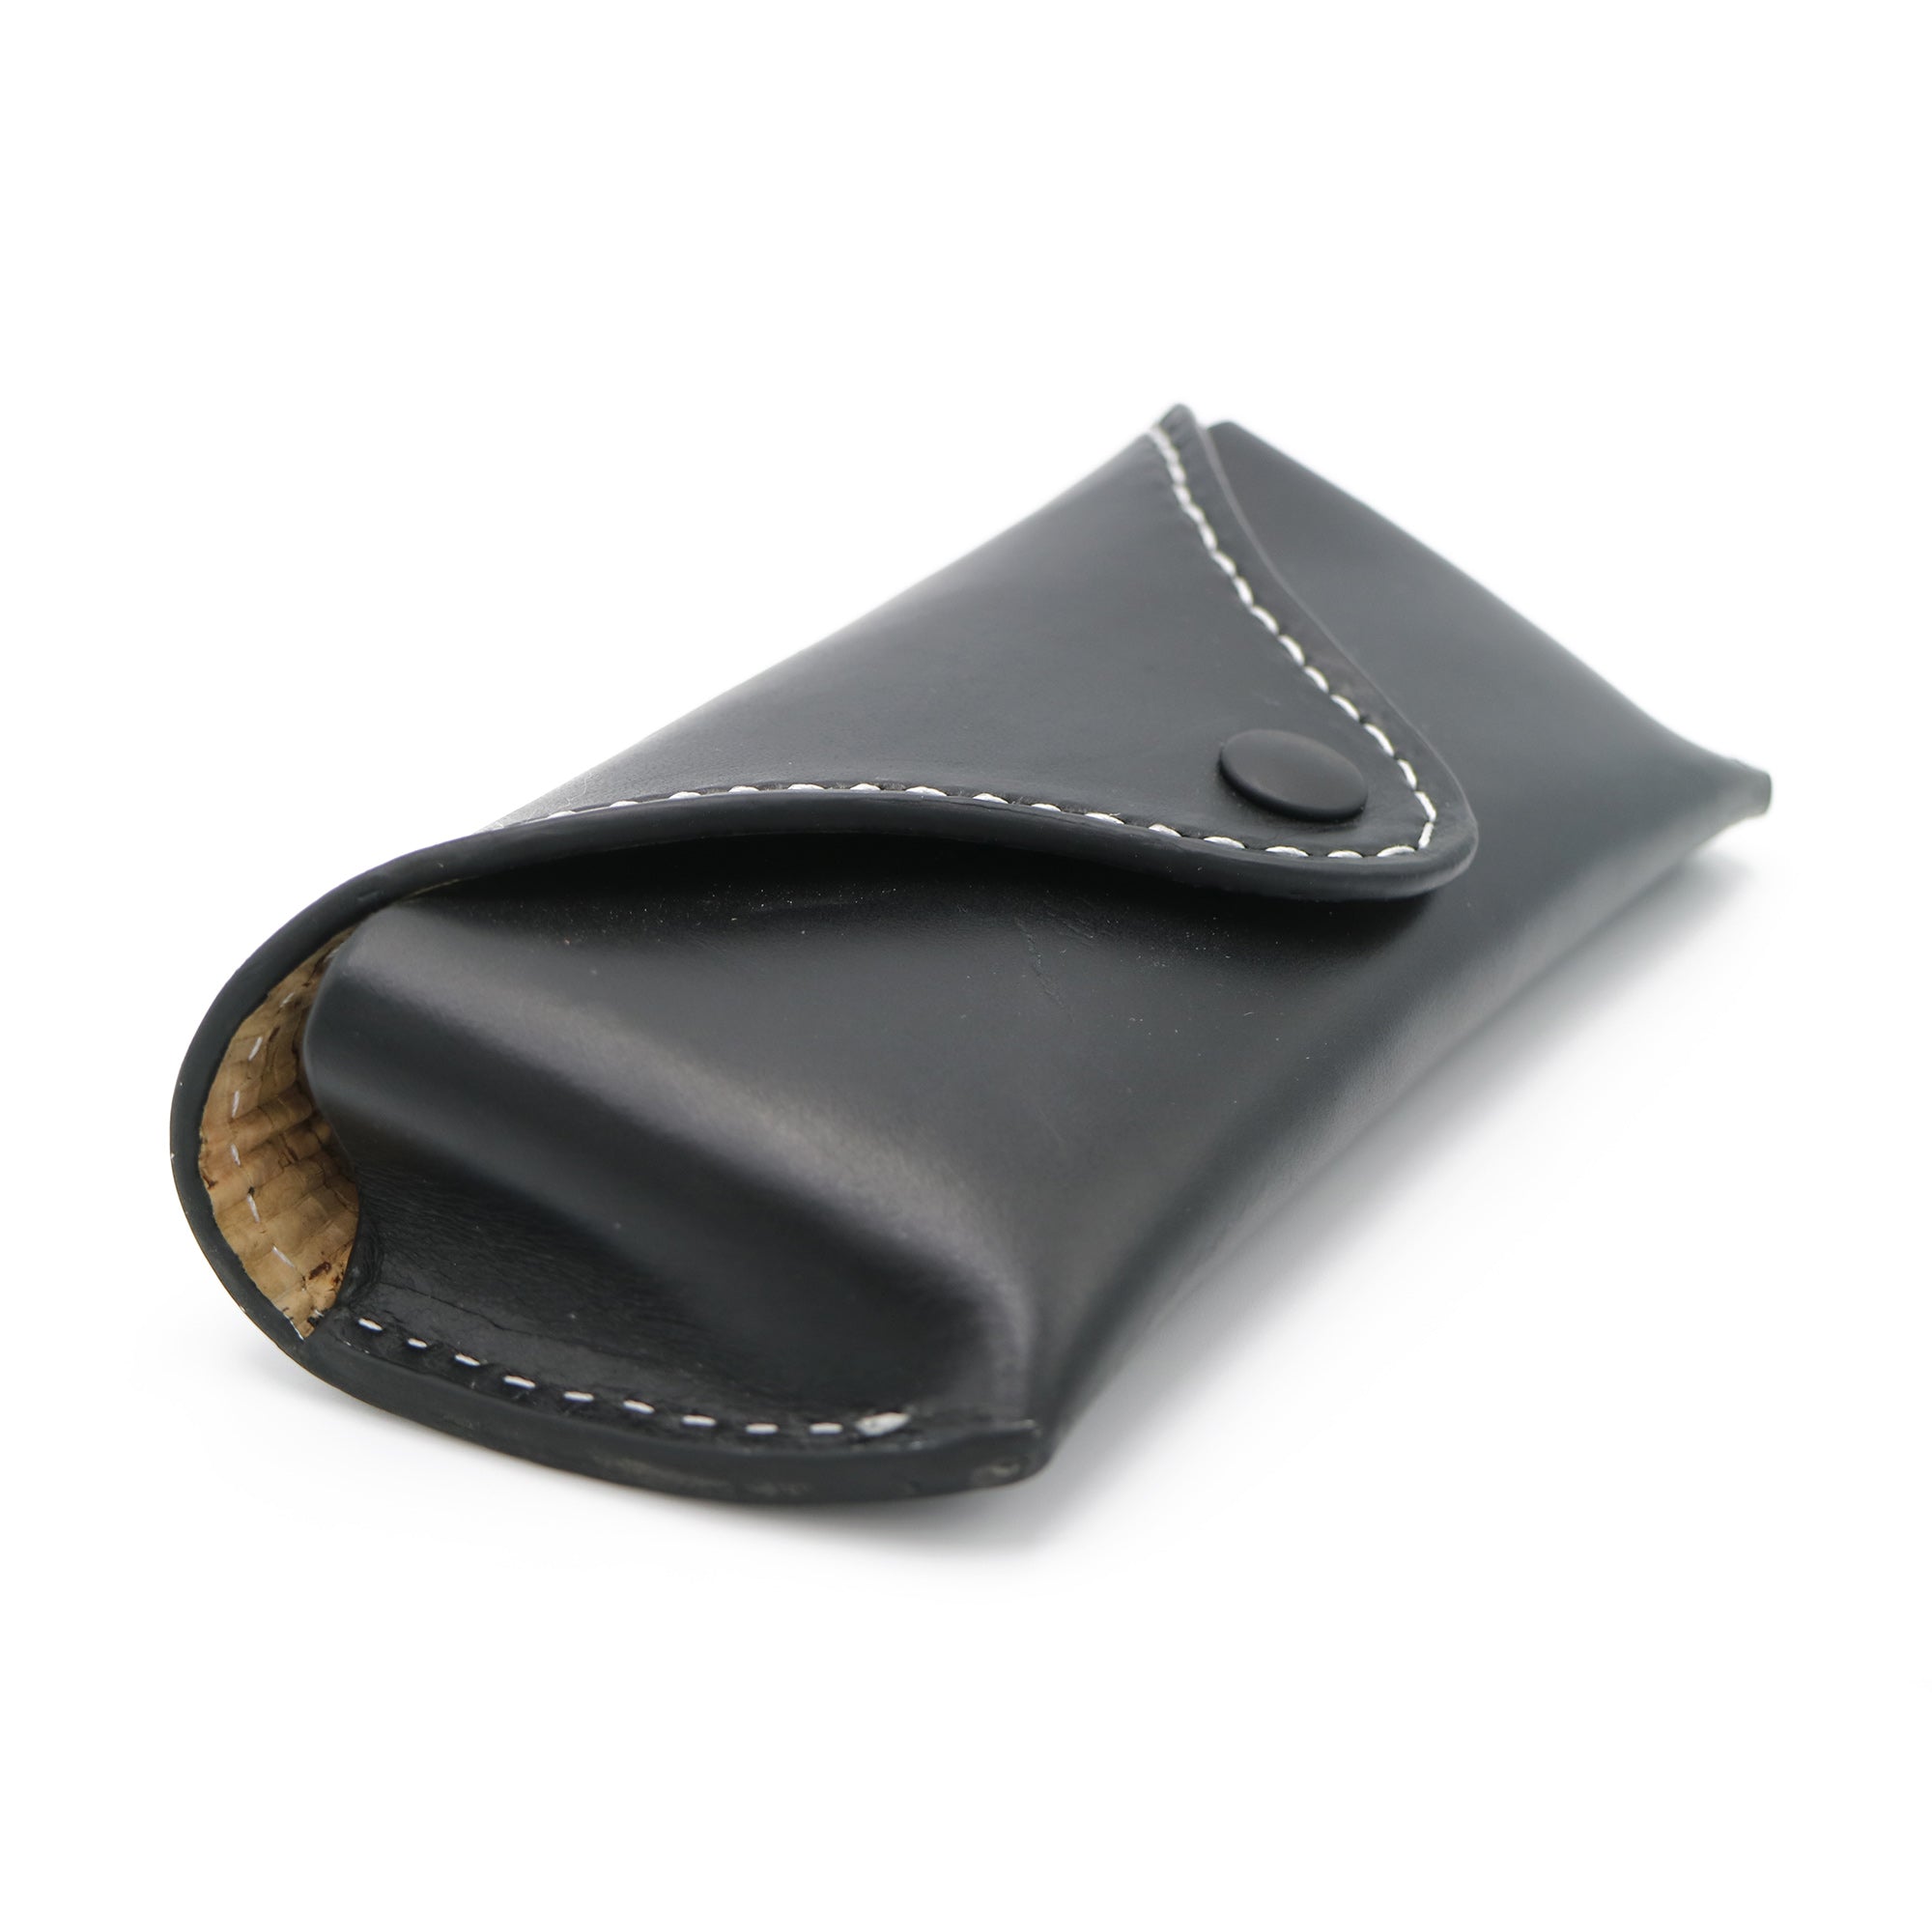 Sunglass Case - Oxford Xcel Leather Lined with Cork - Stonestreet Leather